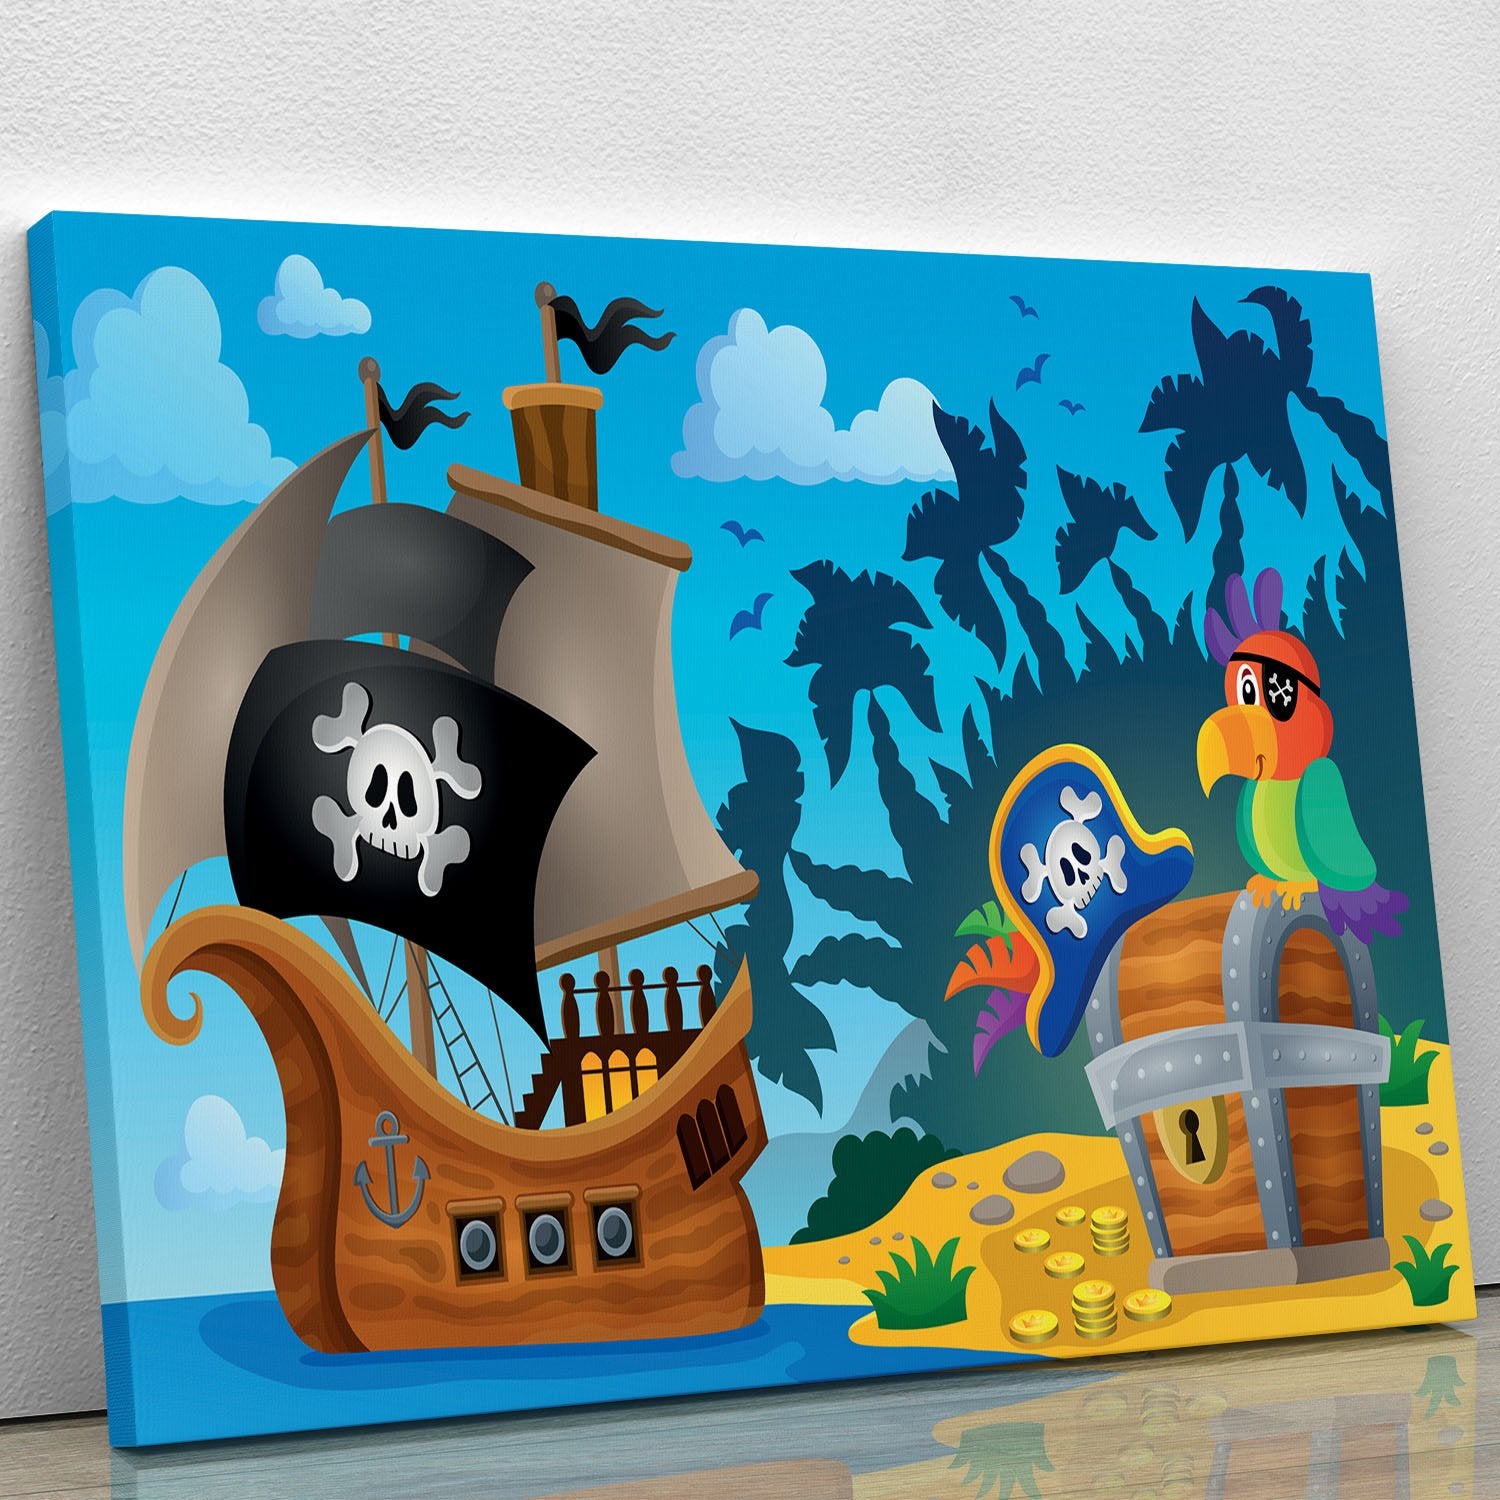 Pirate ship topic image 6 Canvas Print or Poster